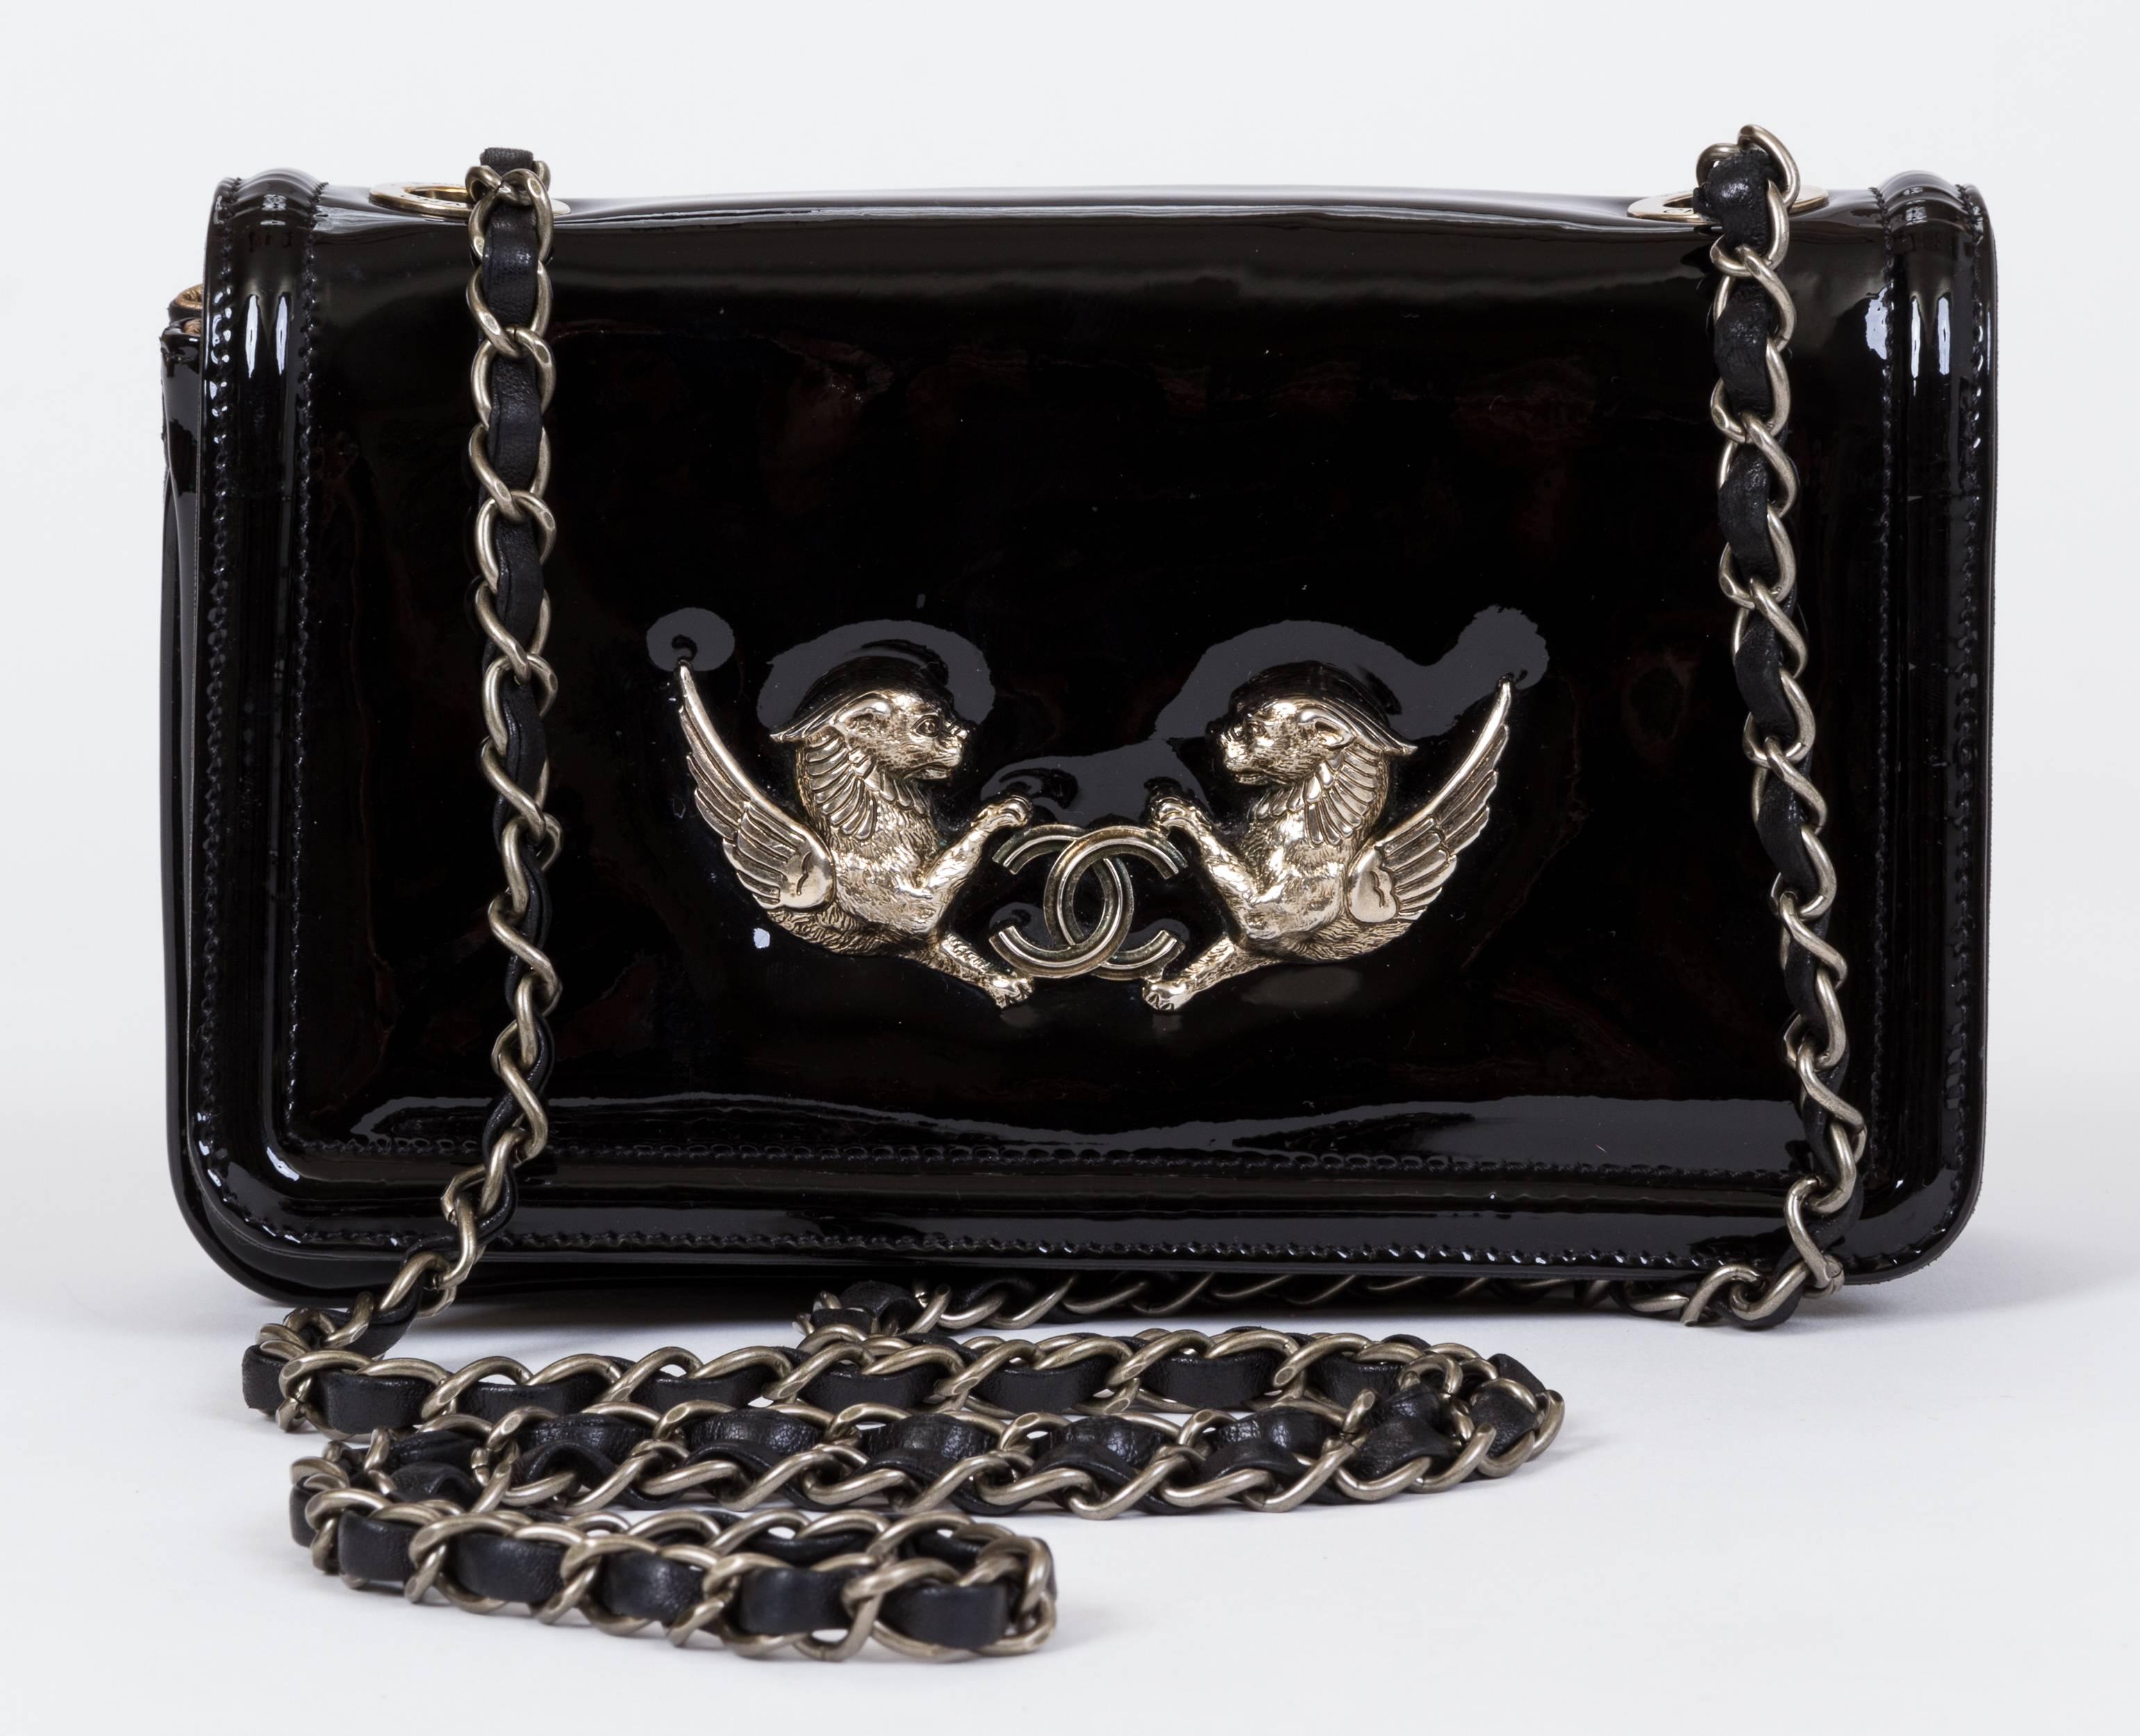 Chanel Paris Venise evening bag in black patent leather, black lambskin and gold leather interior. Winged bronze lions decoration. Can be worn cross body or shoulder . Shoulder drop 29